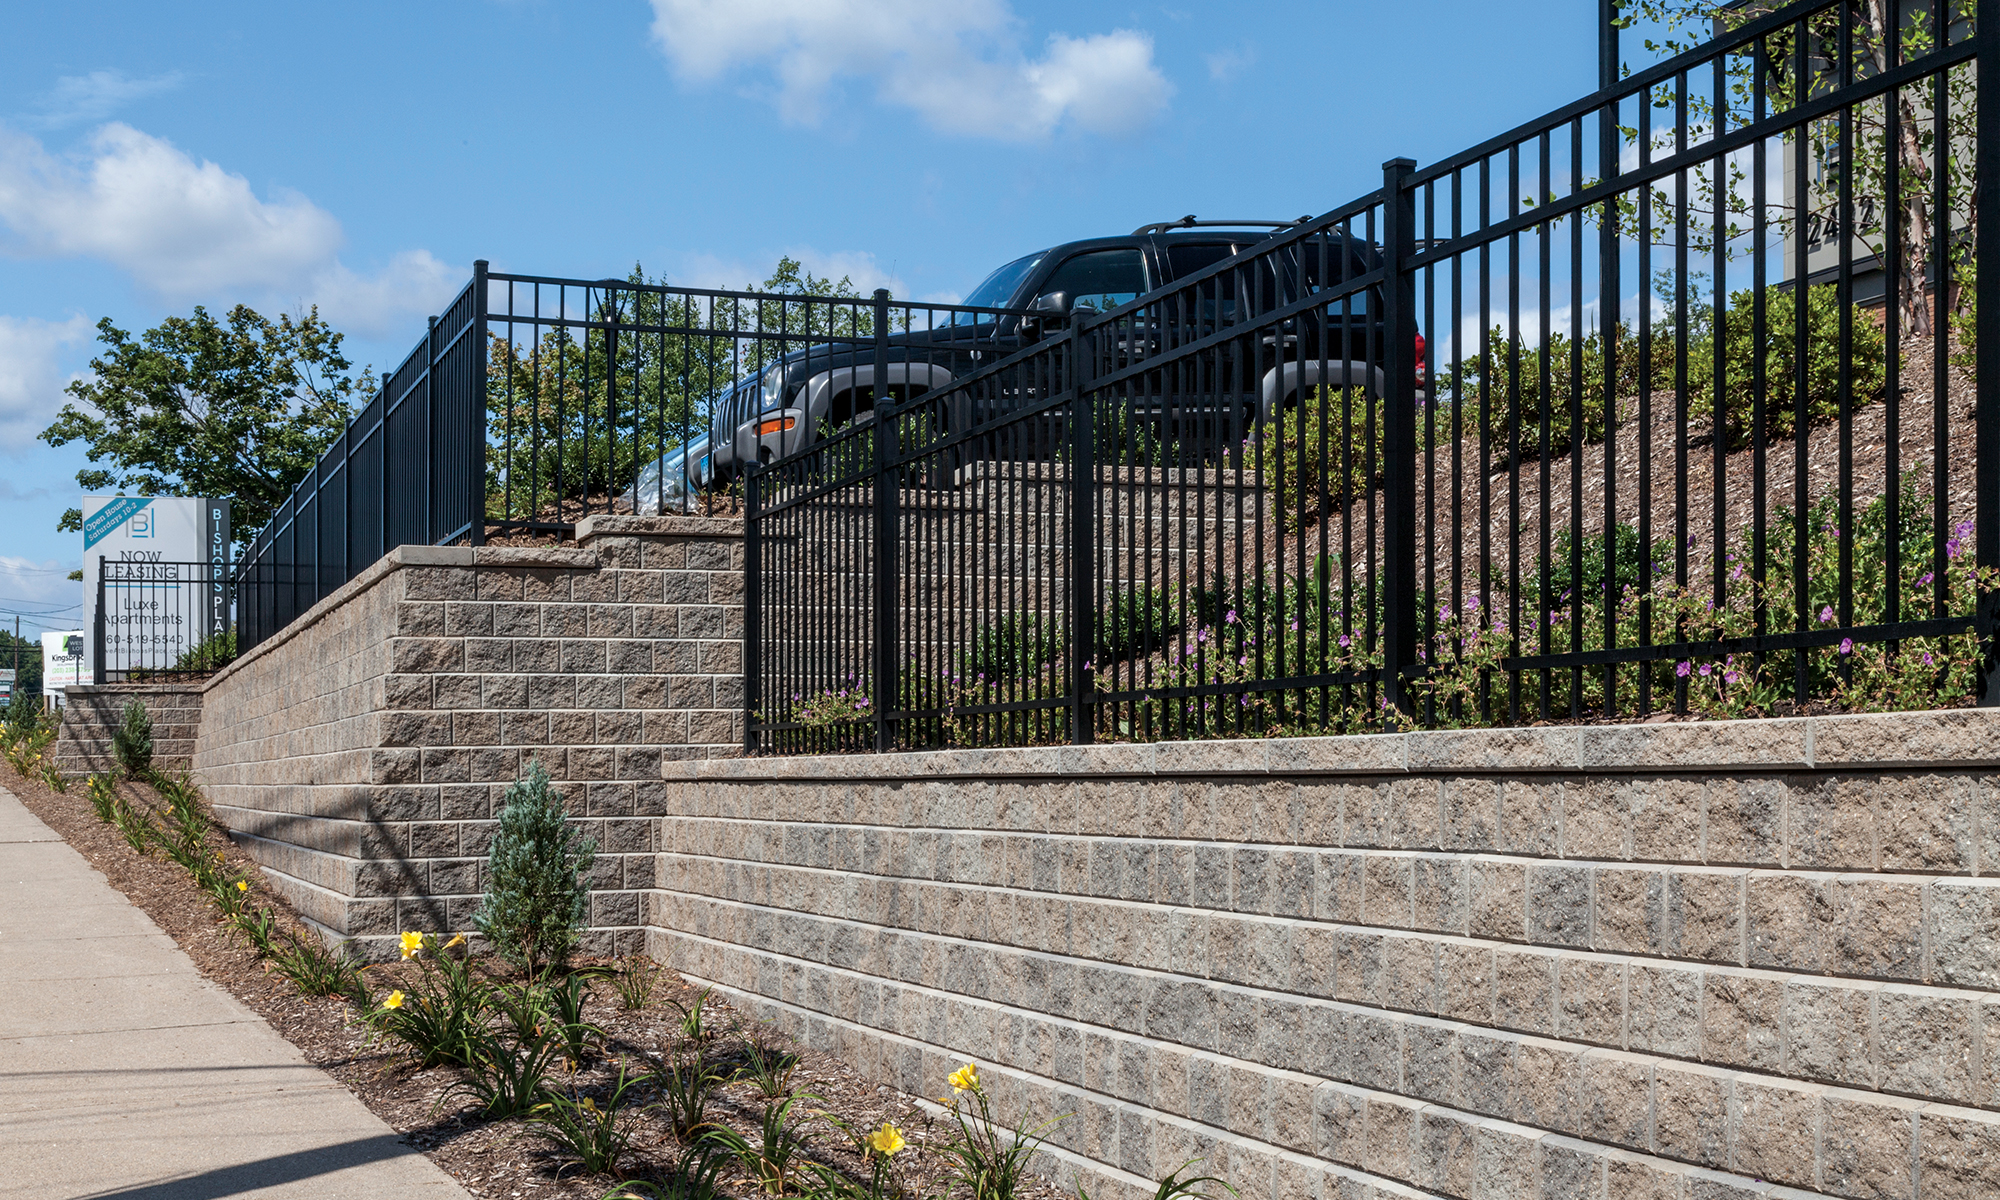 This retaining wall at Bishop’s Place in West Hartford, Connecticut, lends a nice aesthetic and maximizes the space on the property.